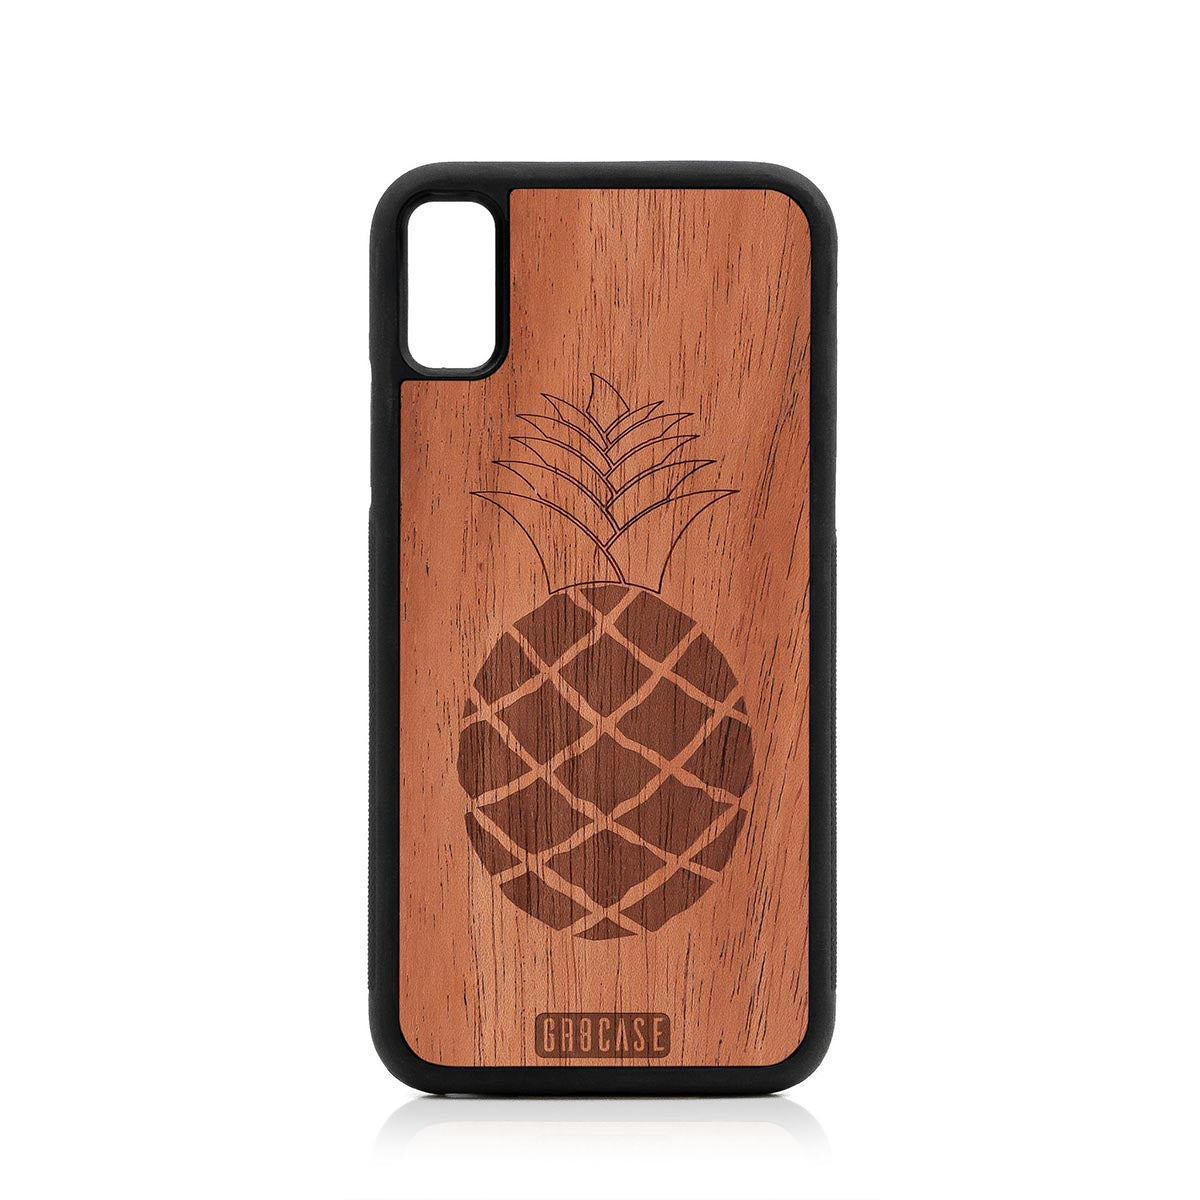 Pineapple Design Wood Case For iPhone X/XS by GR8CASE